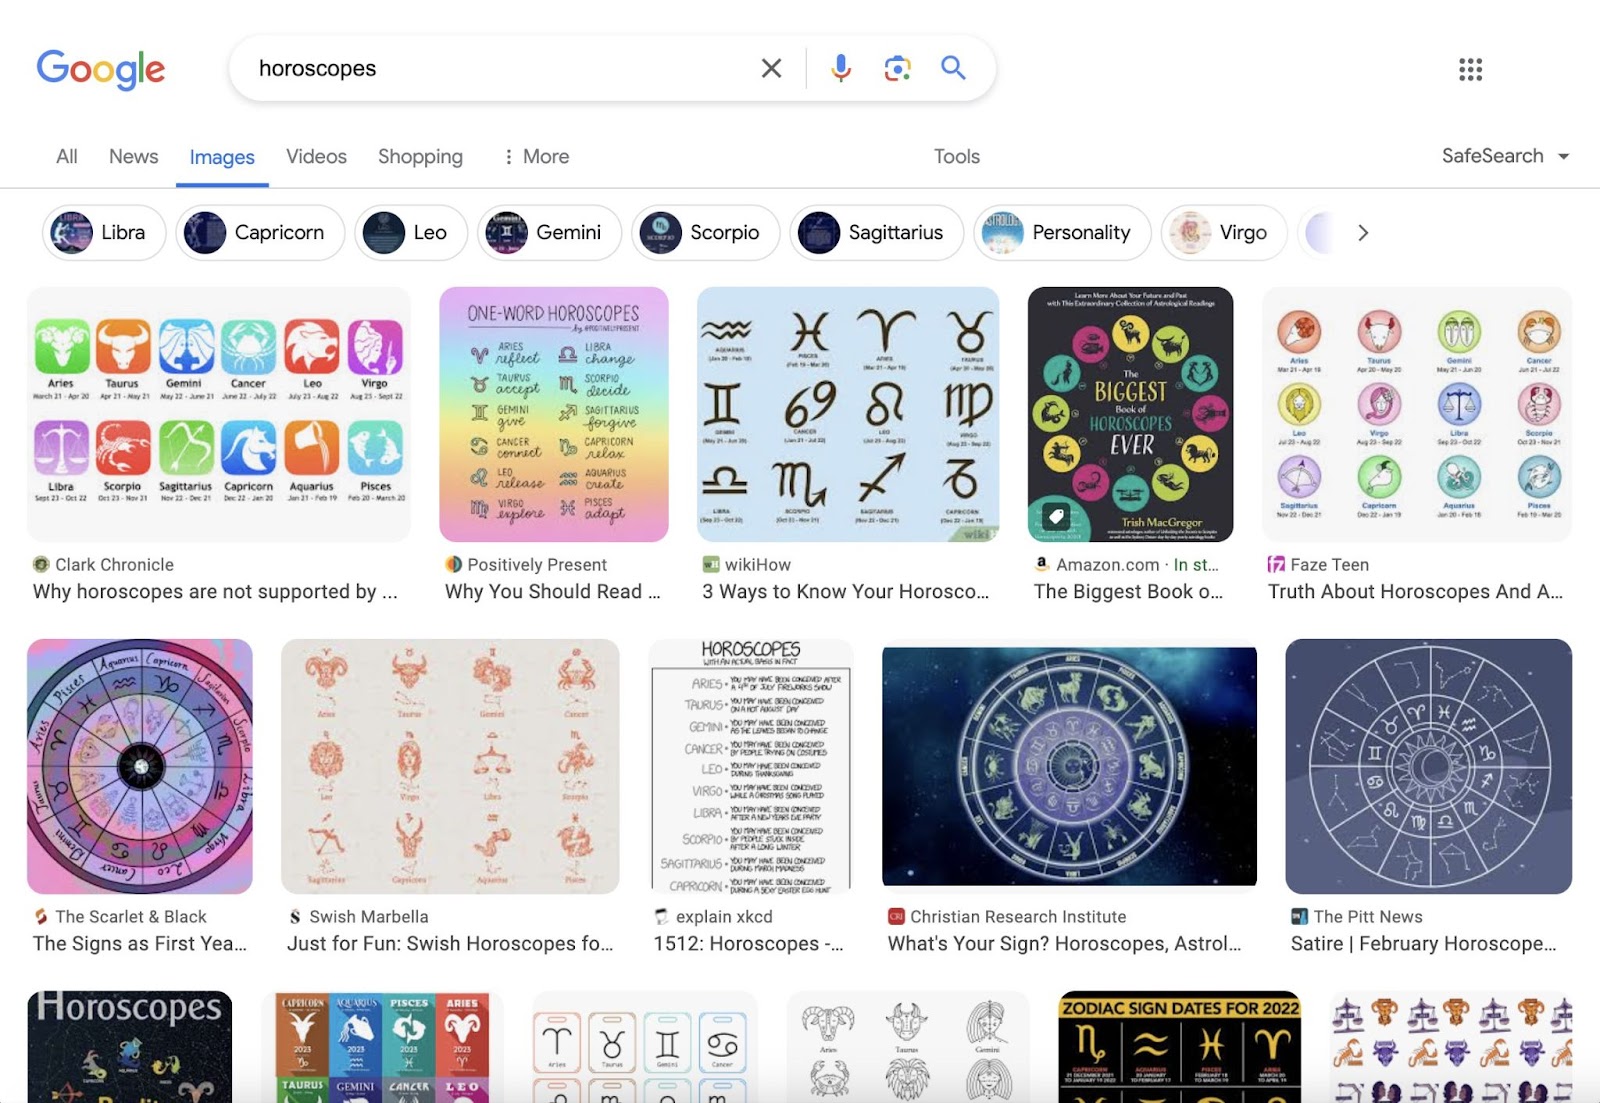 Google “Images” results for "horoscopes" connected  desktop